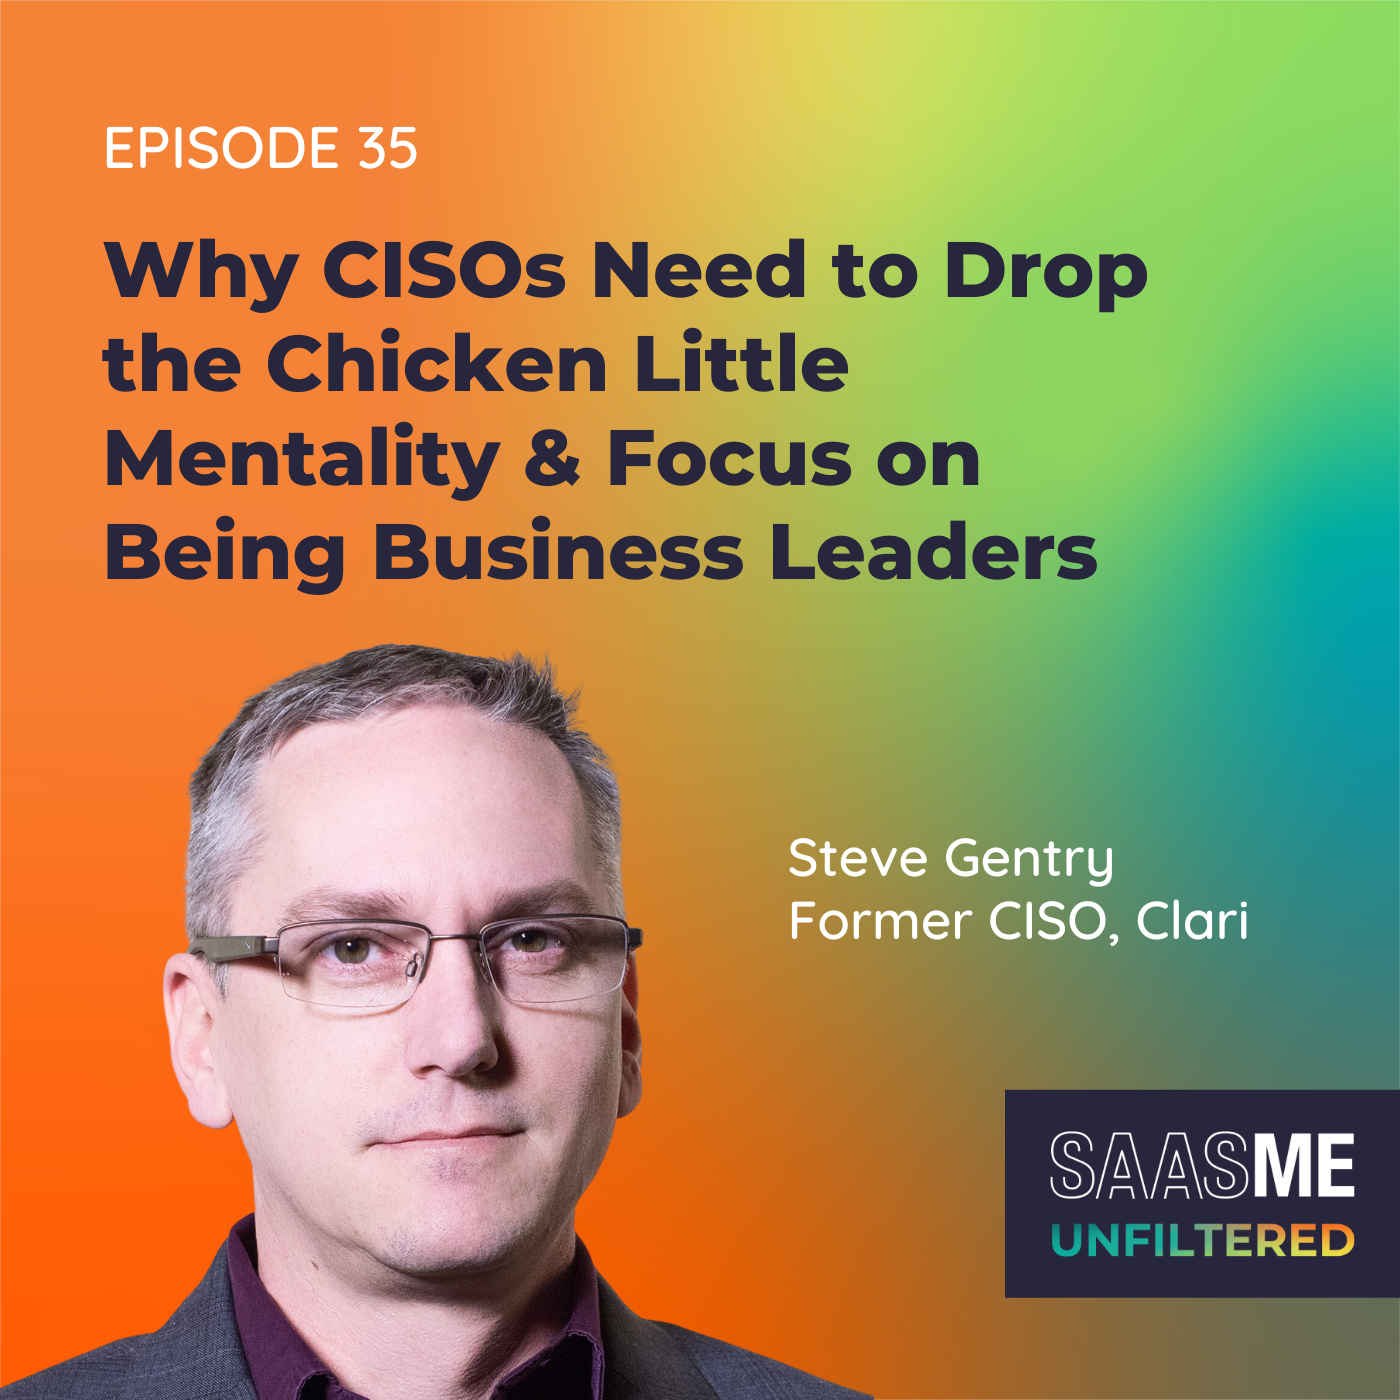 Steve Gentry: Why CISOs Need to Drop the Chicken Little Mentality & Focus on Being Business Leaders